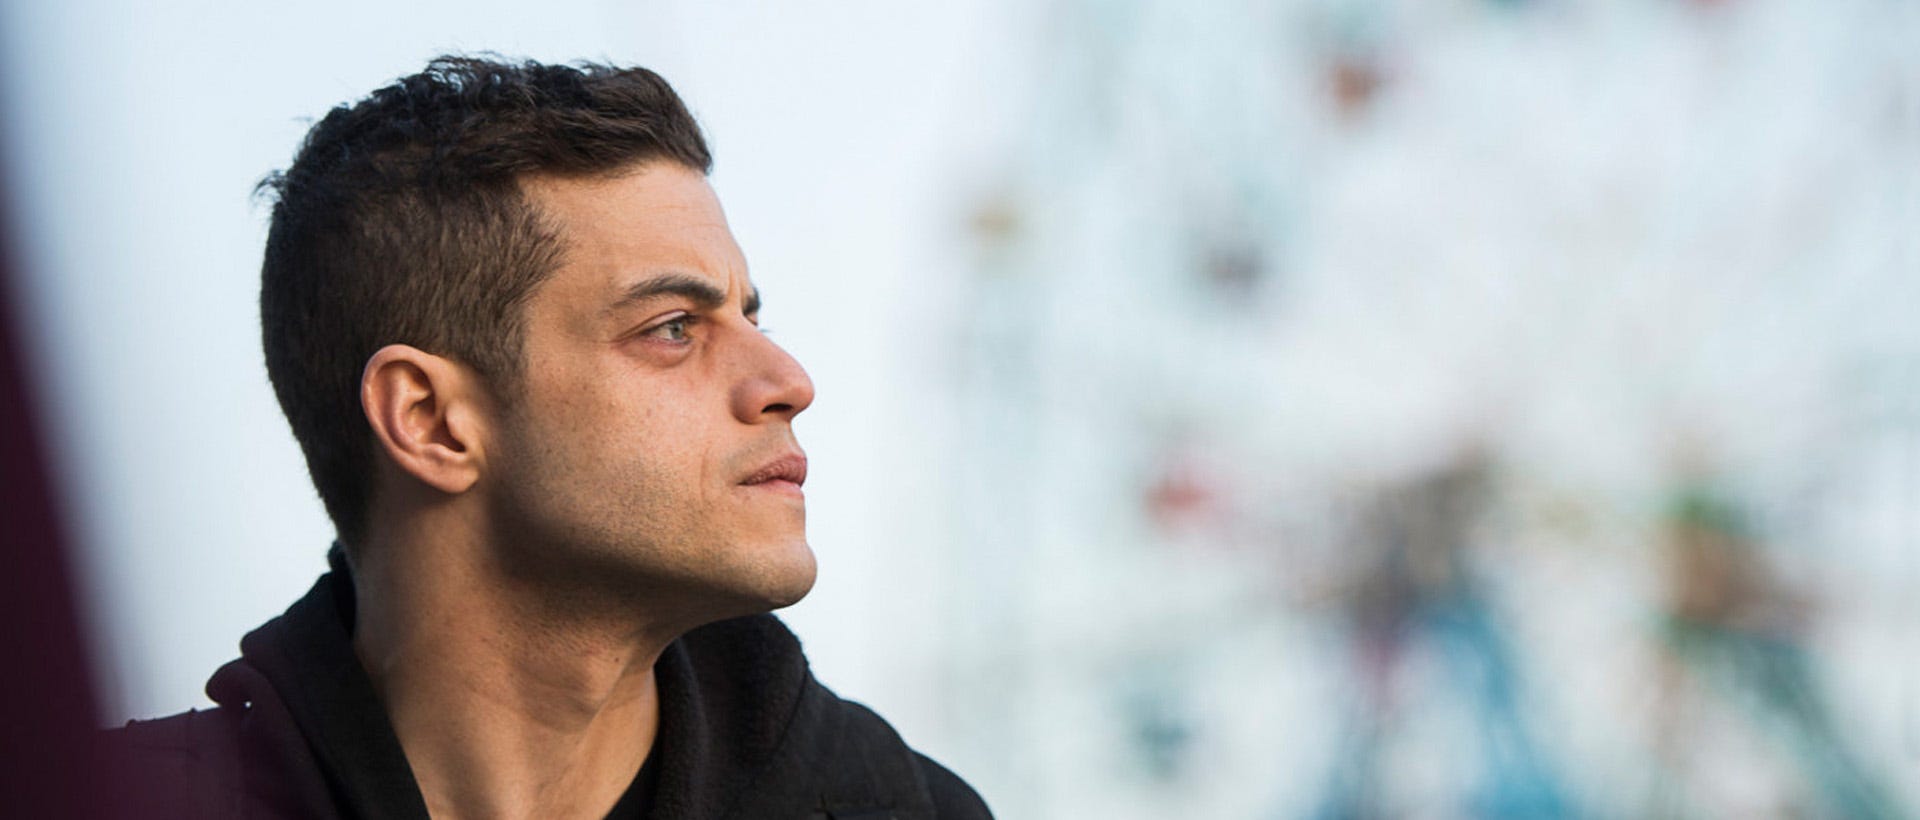 Debt Erasing Plot From 'Mr. Robot' Is Impossible